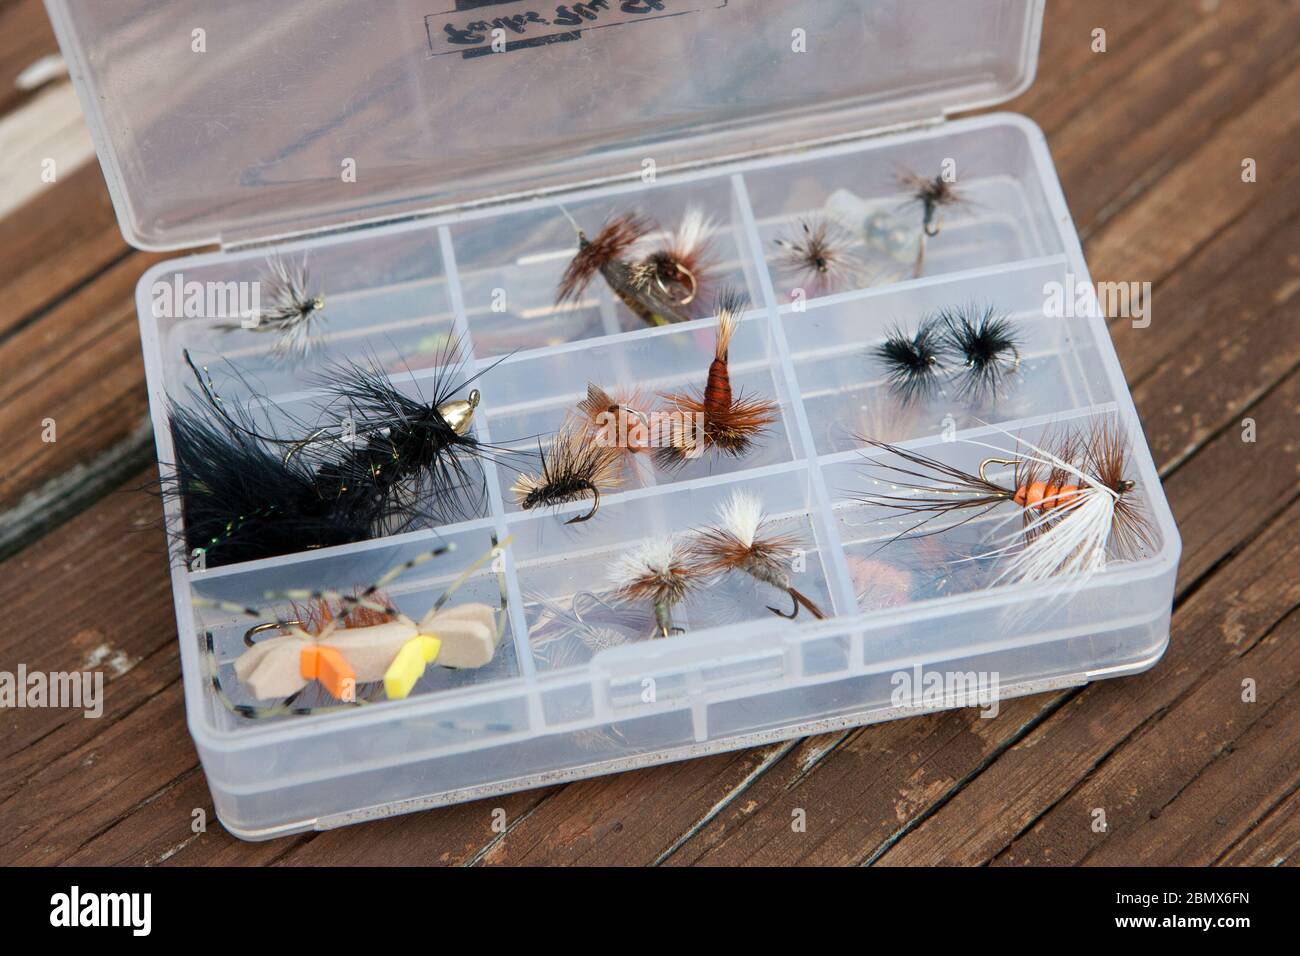 https://c8.alamy.com/comp/2BMX6FN/a-small-tackle-box-filled-with-fly-fishing-lures-stands-open-on-a-wooden-porch-in-the-catskills-new-york-usa-2BMX6FN.jpg